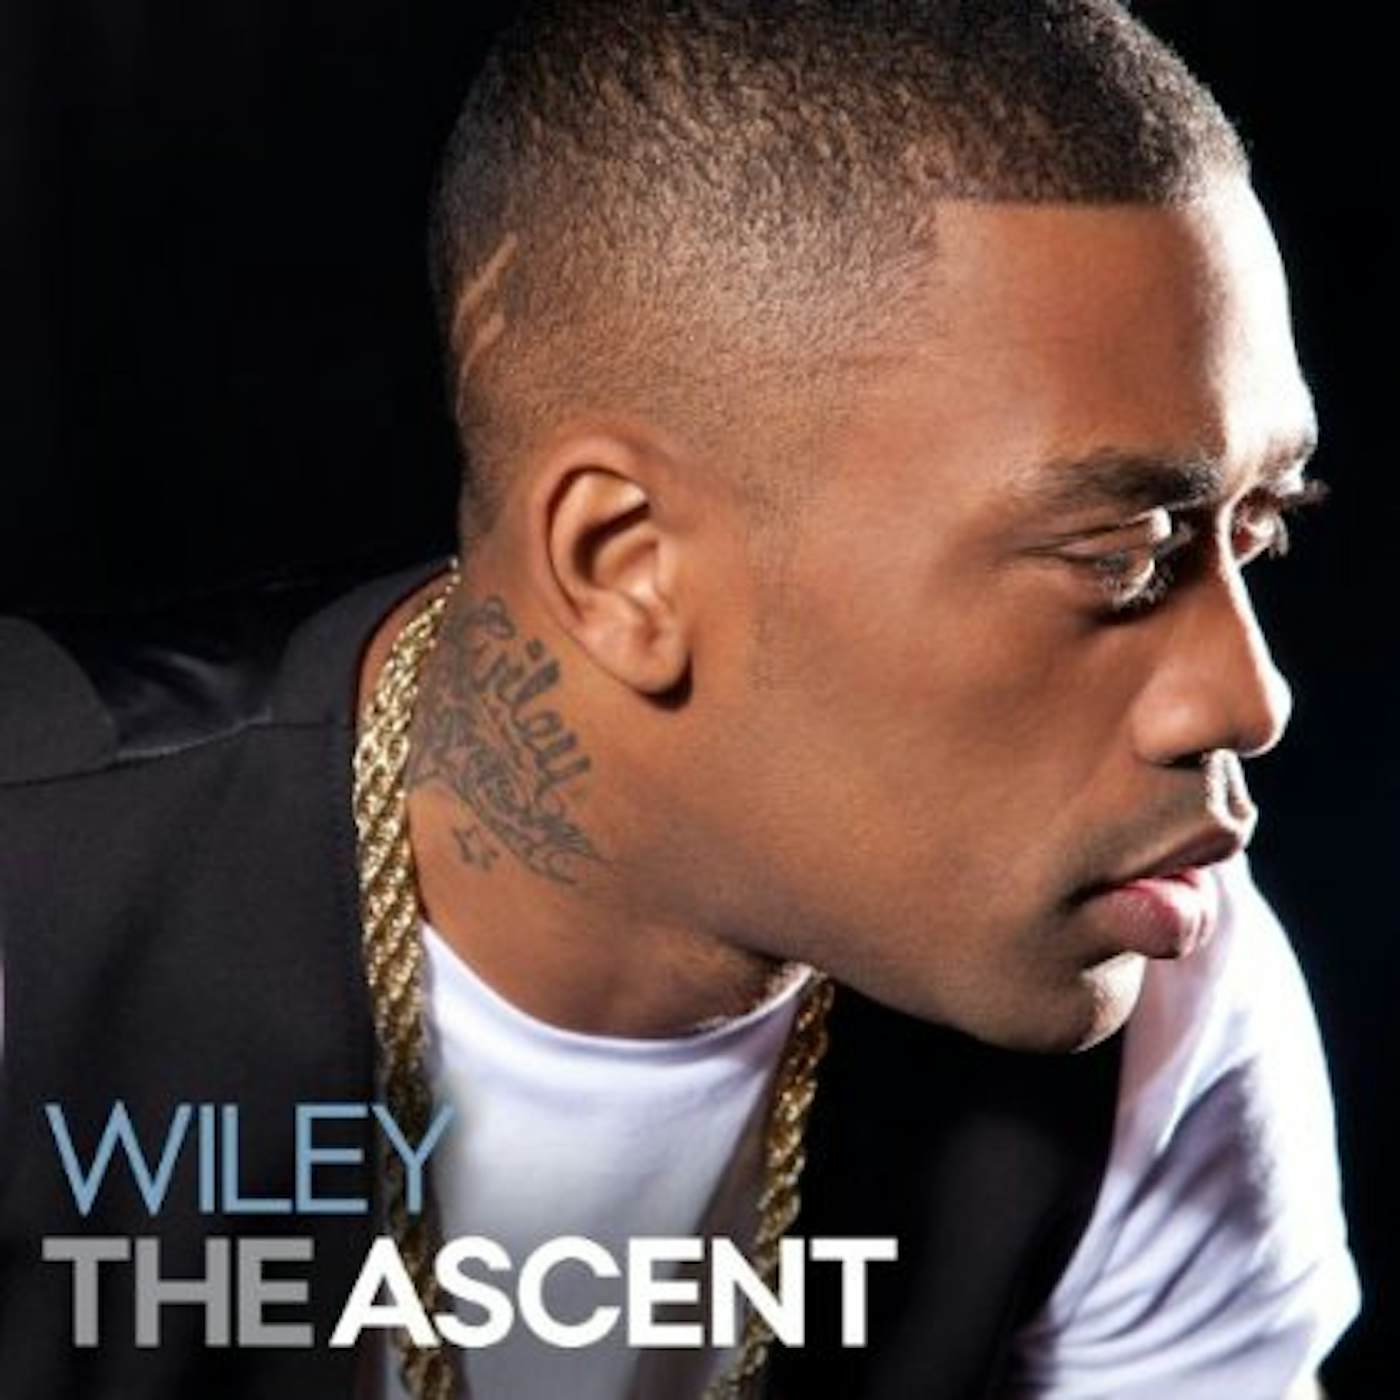 Wiley ASCENT CD